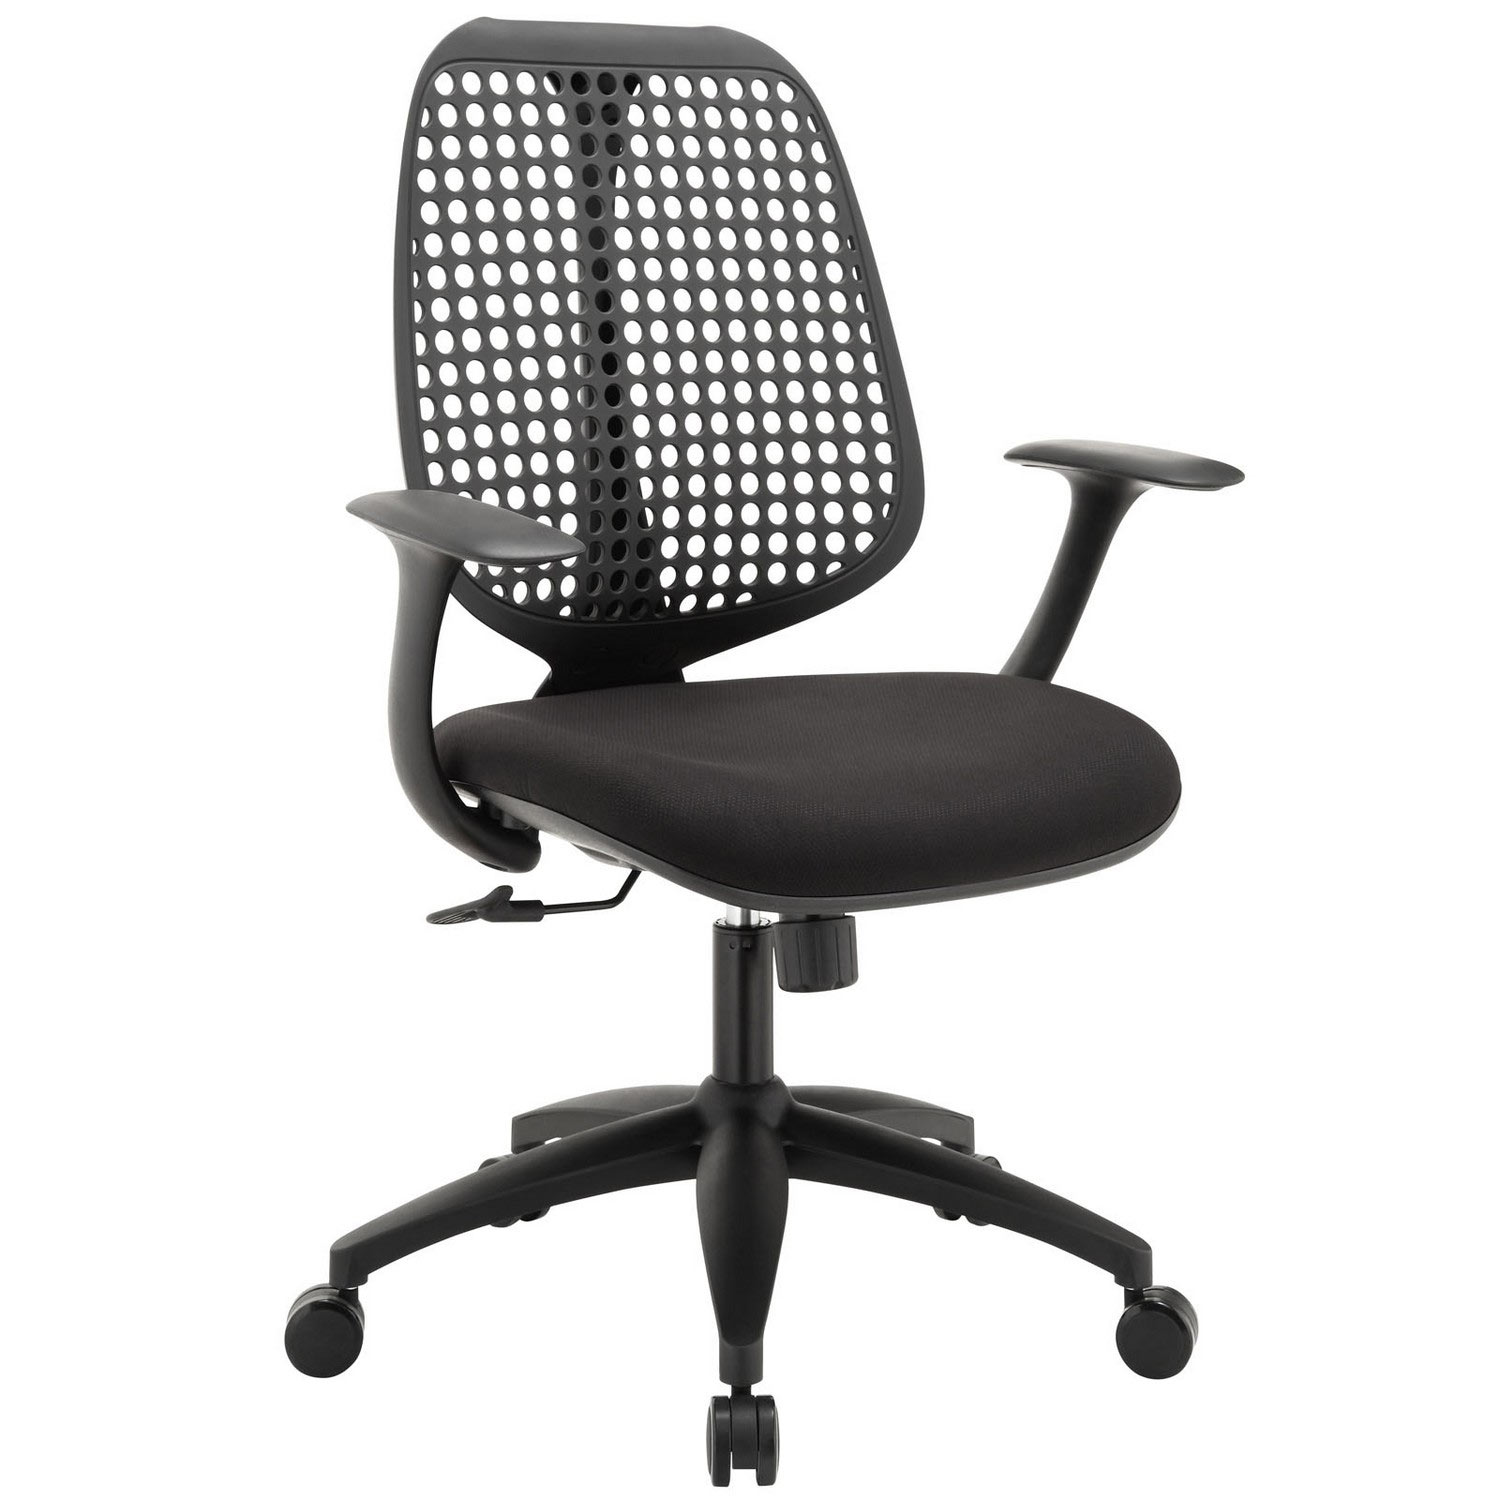 Modway Reverb Office Chair - Black